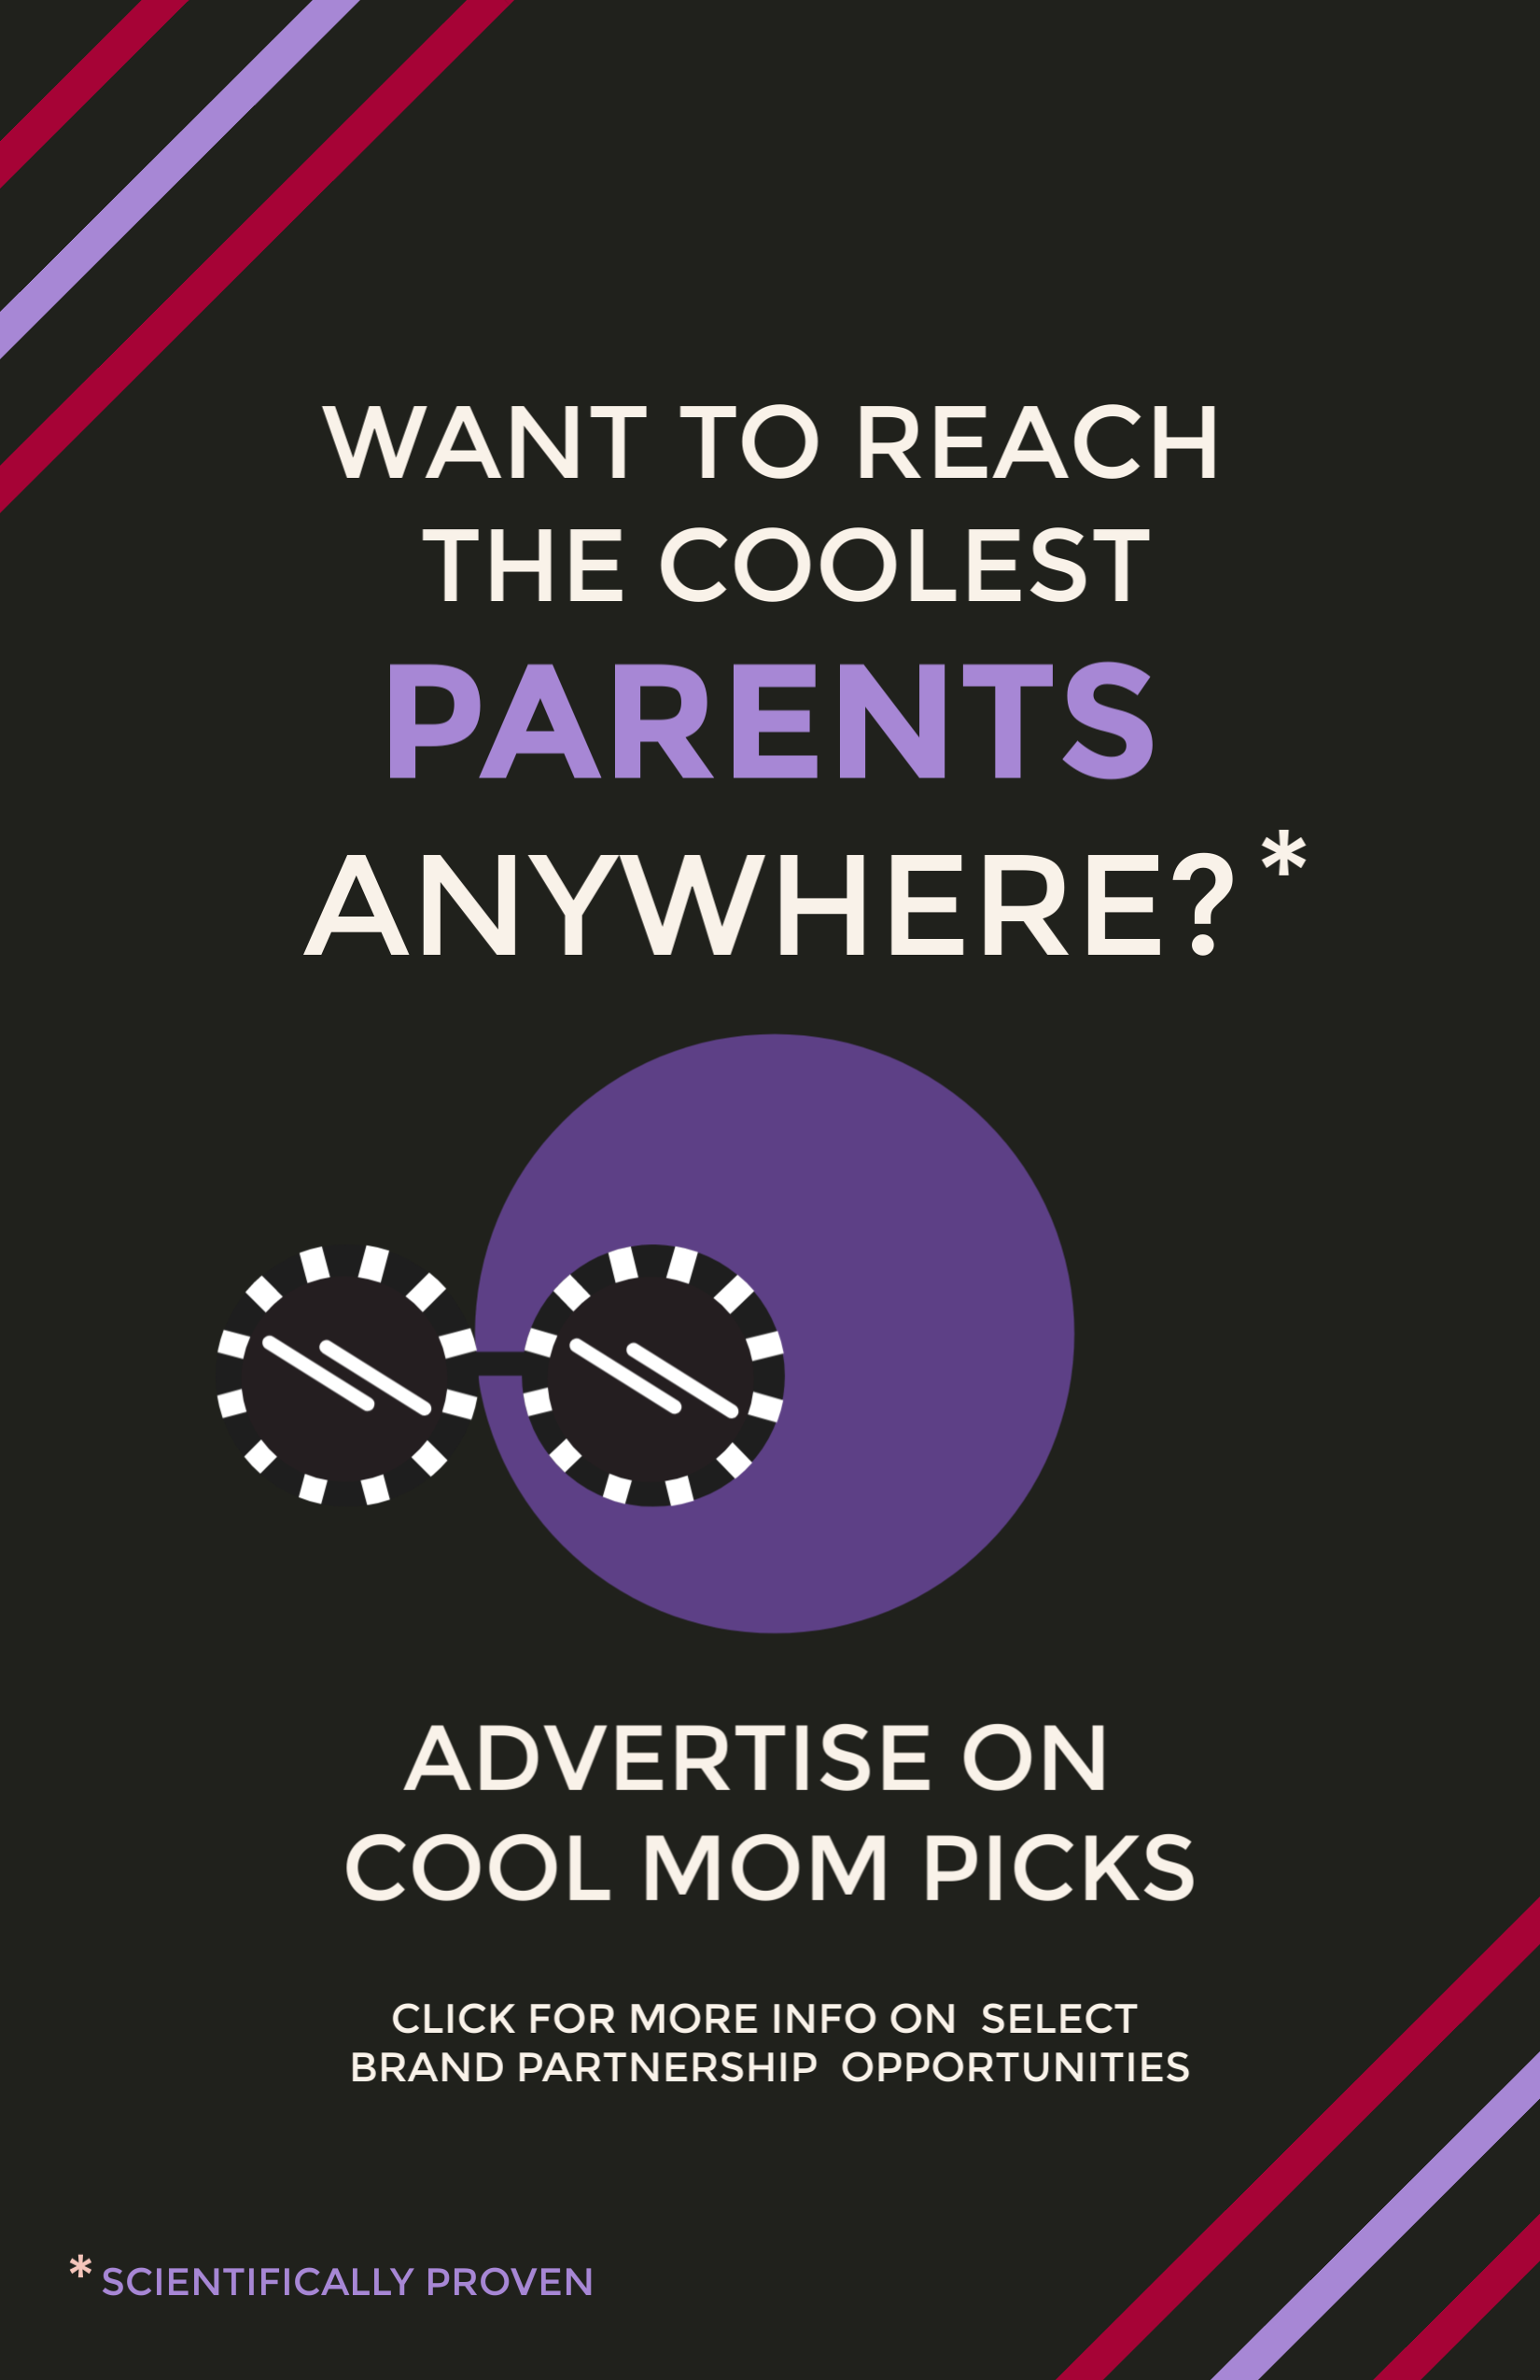  Ad opportunities on Cool Mom Picks network